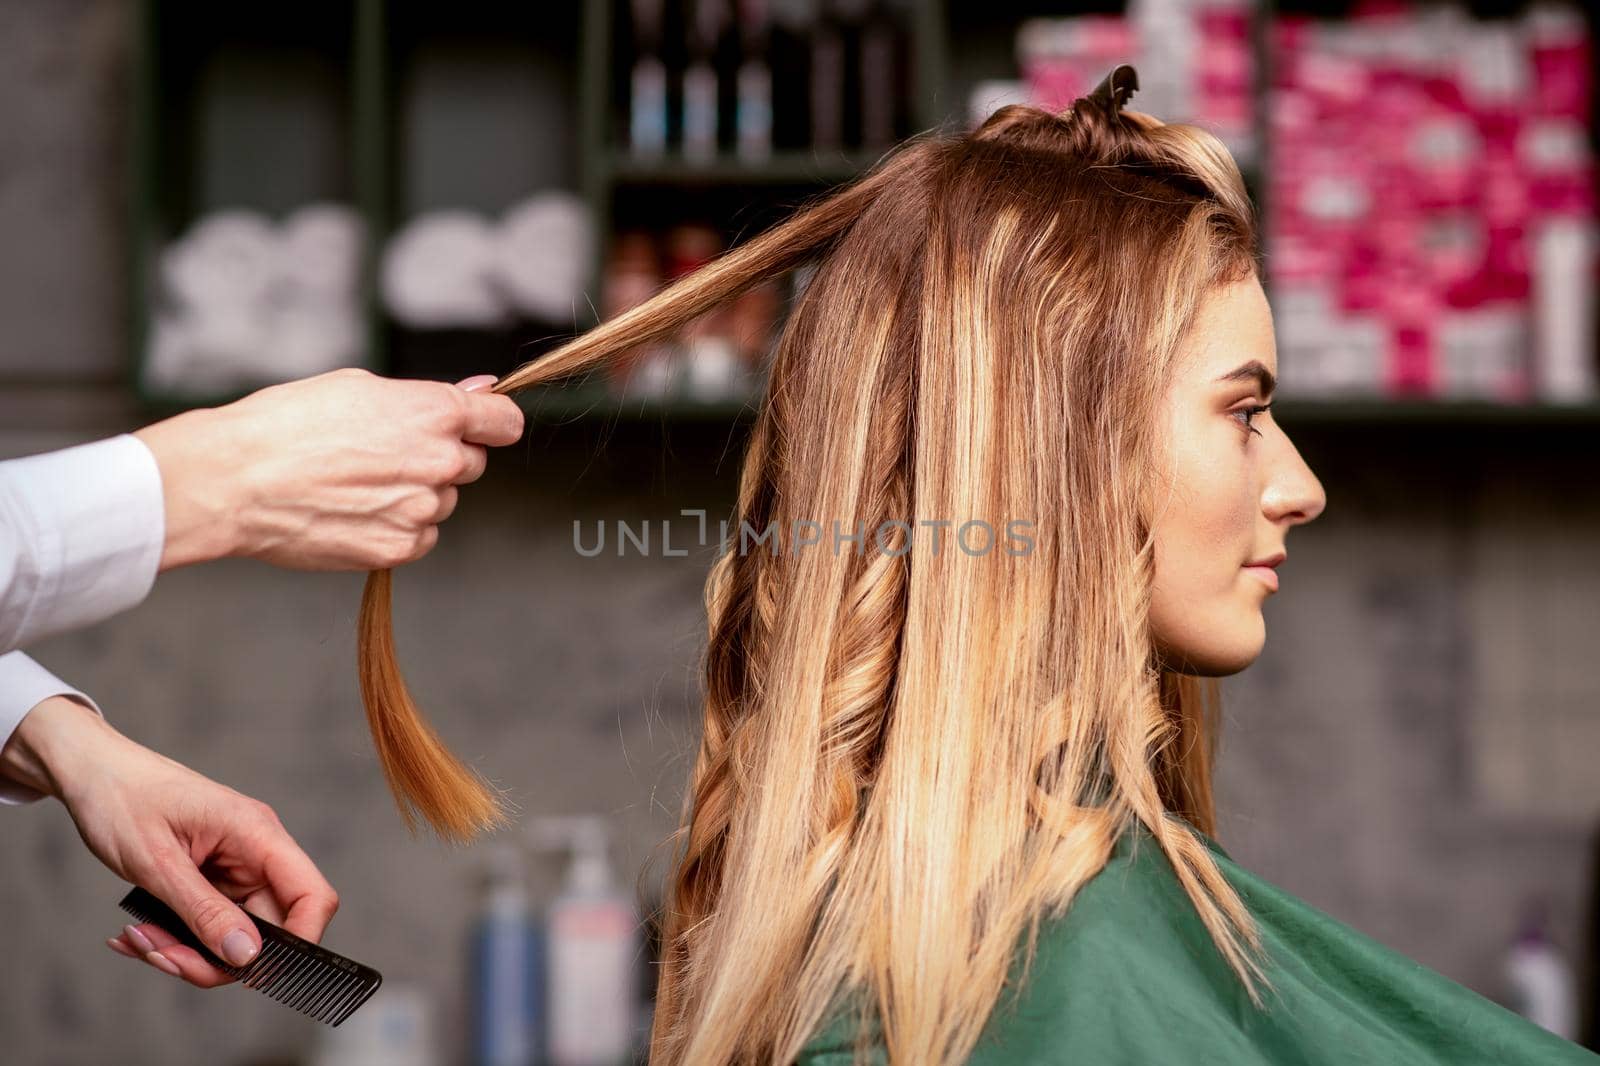 Professional hair care. Beautiful young caucasian blonde woman with long hair receiving hairstyling in a beauty salon